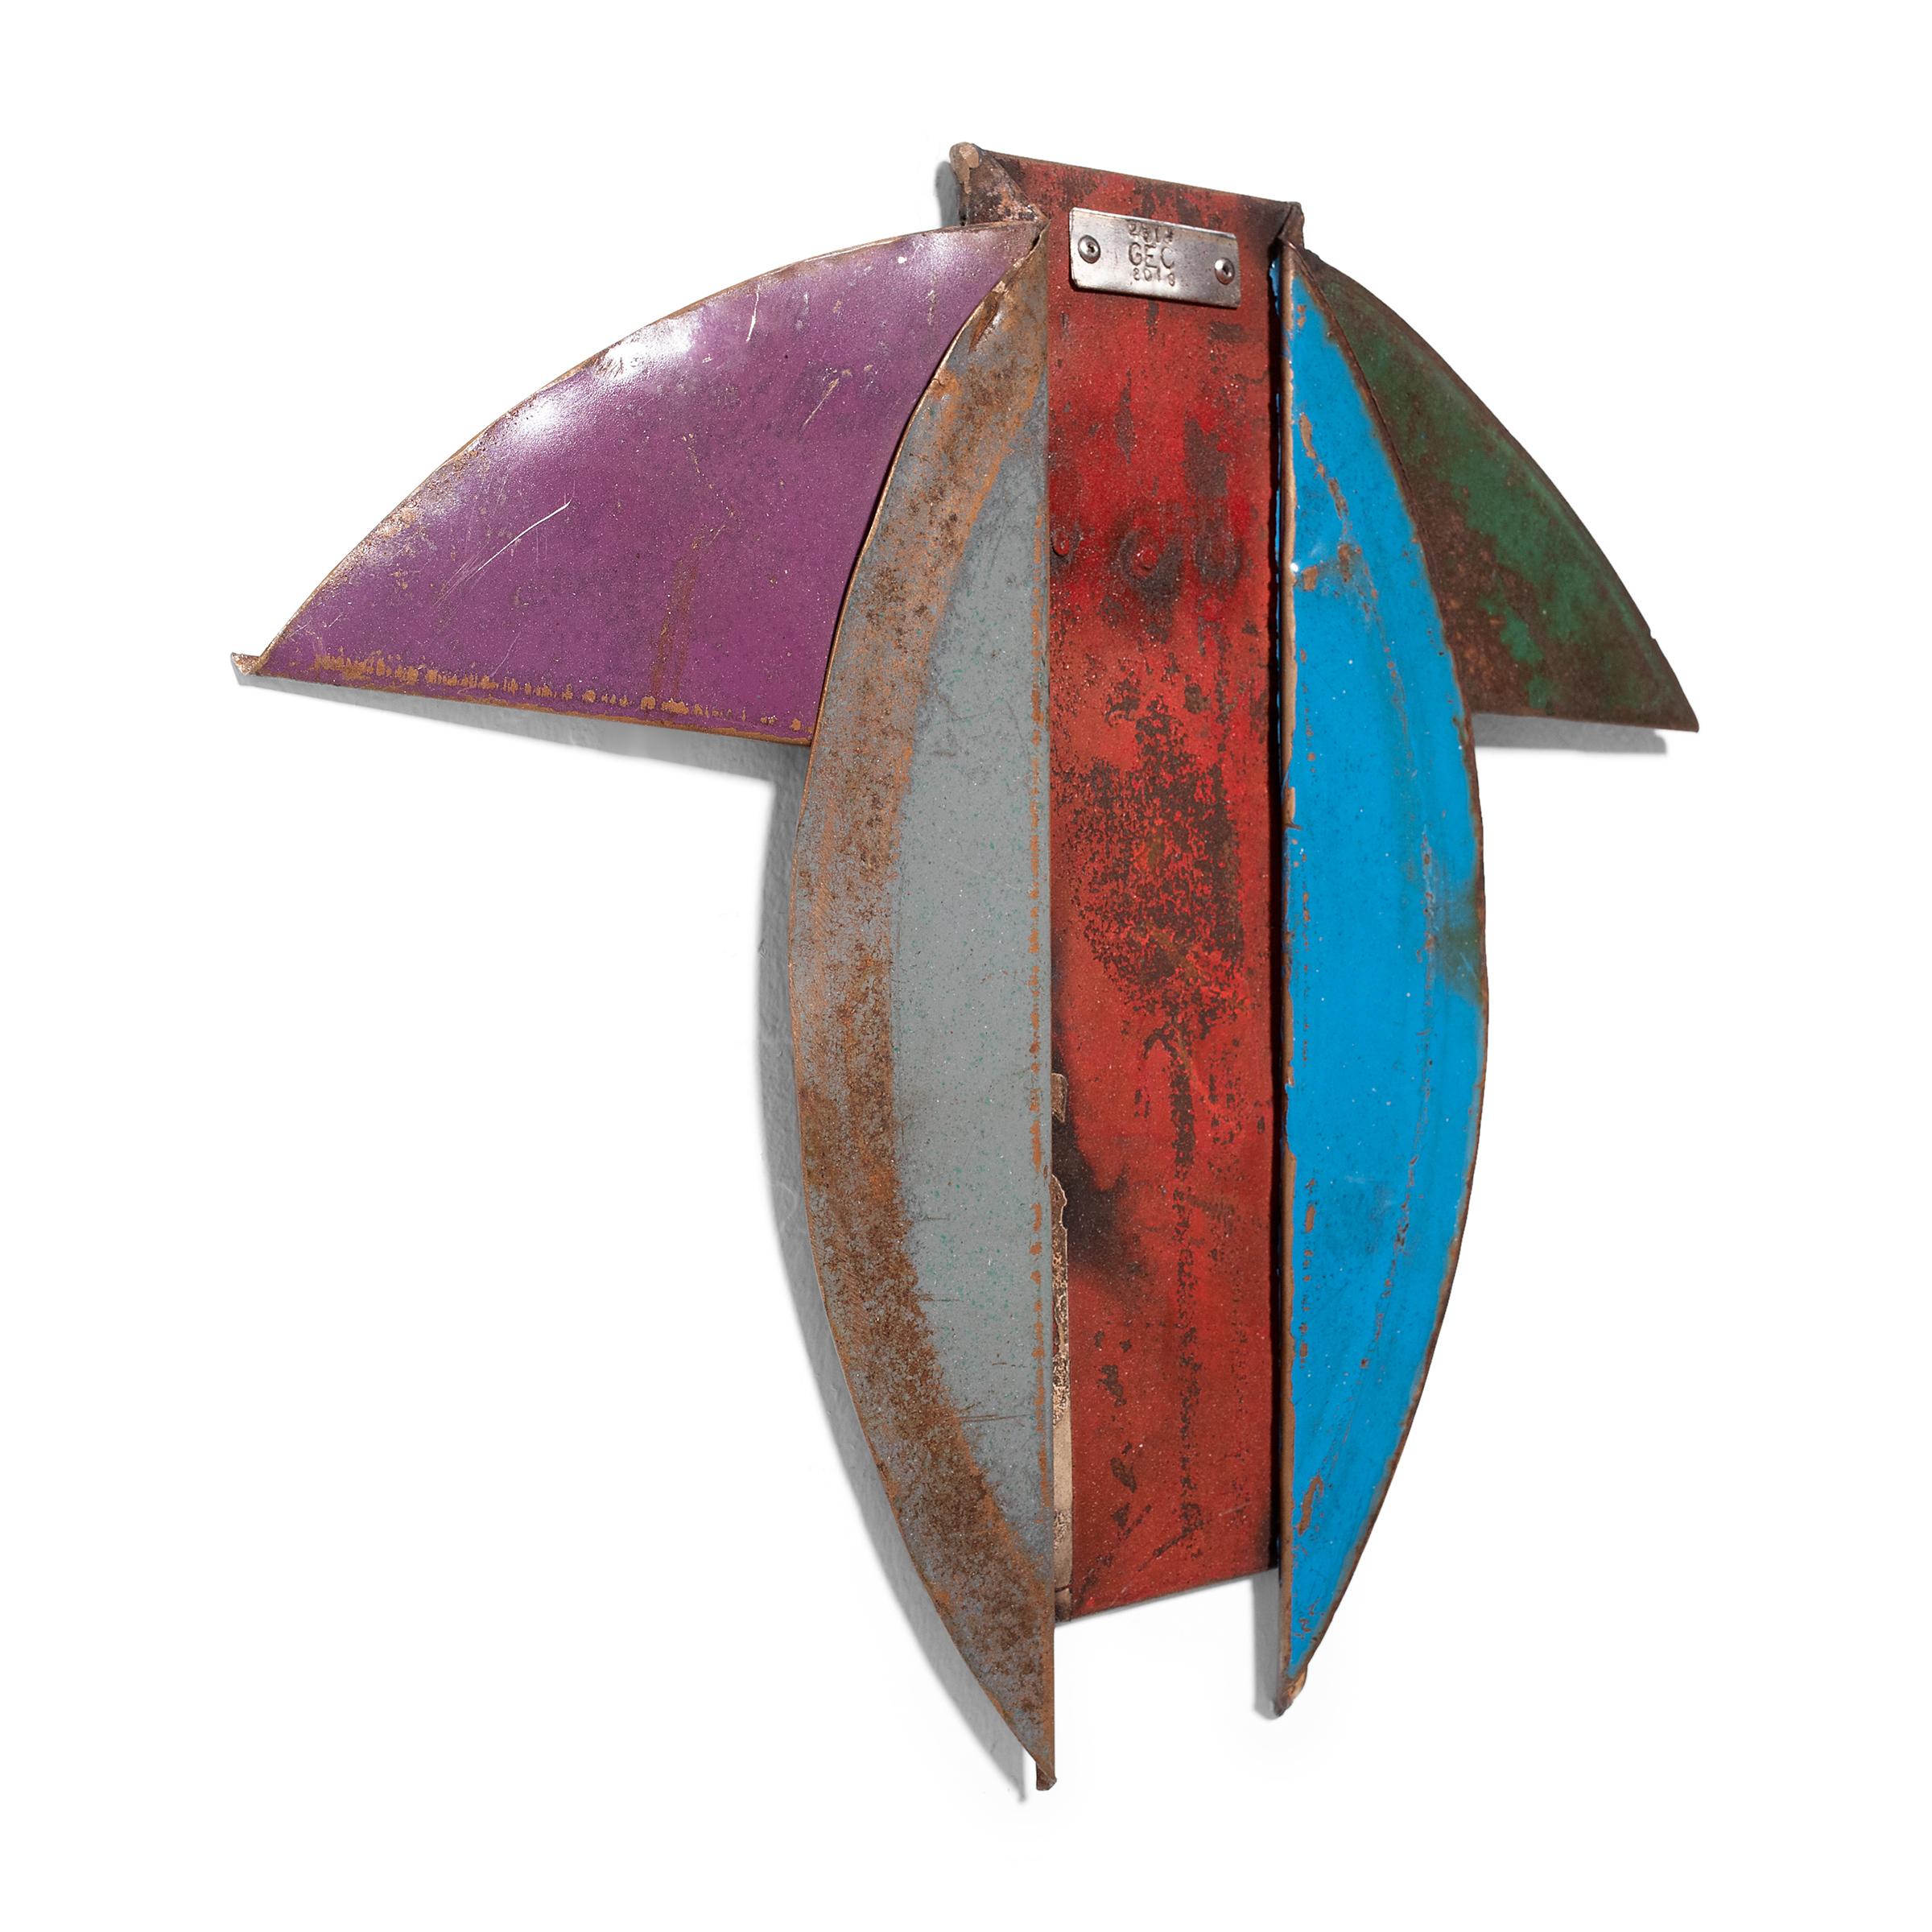 Upon discovering a weathered steel drum that had been warped to resemble the sleeve of a garment, artist Gordon Chandler was inspired to embark on a series of kimono sculptures formed from found metal scraps. With an eye to the aesthetic